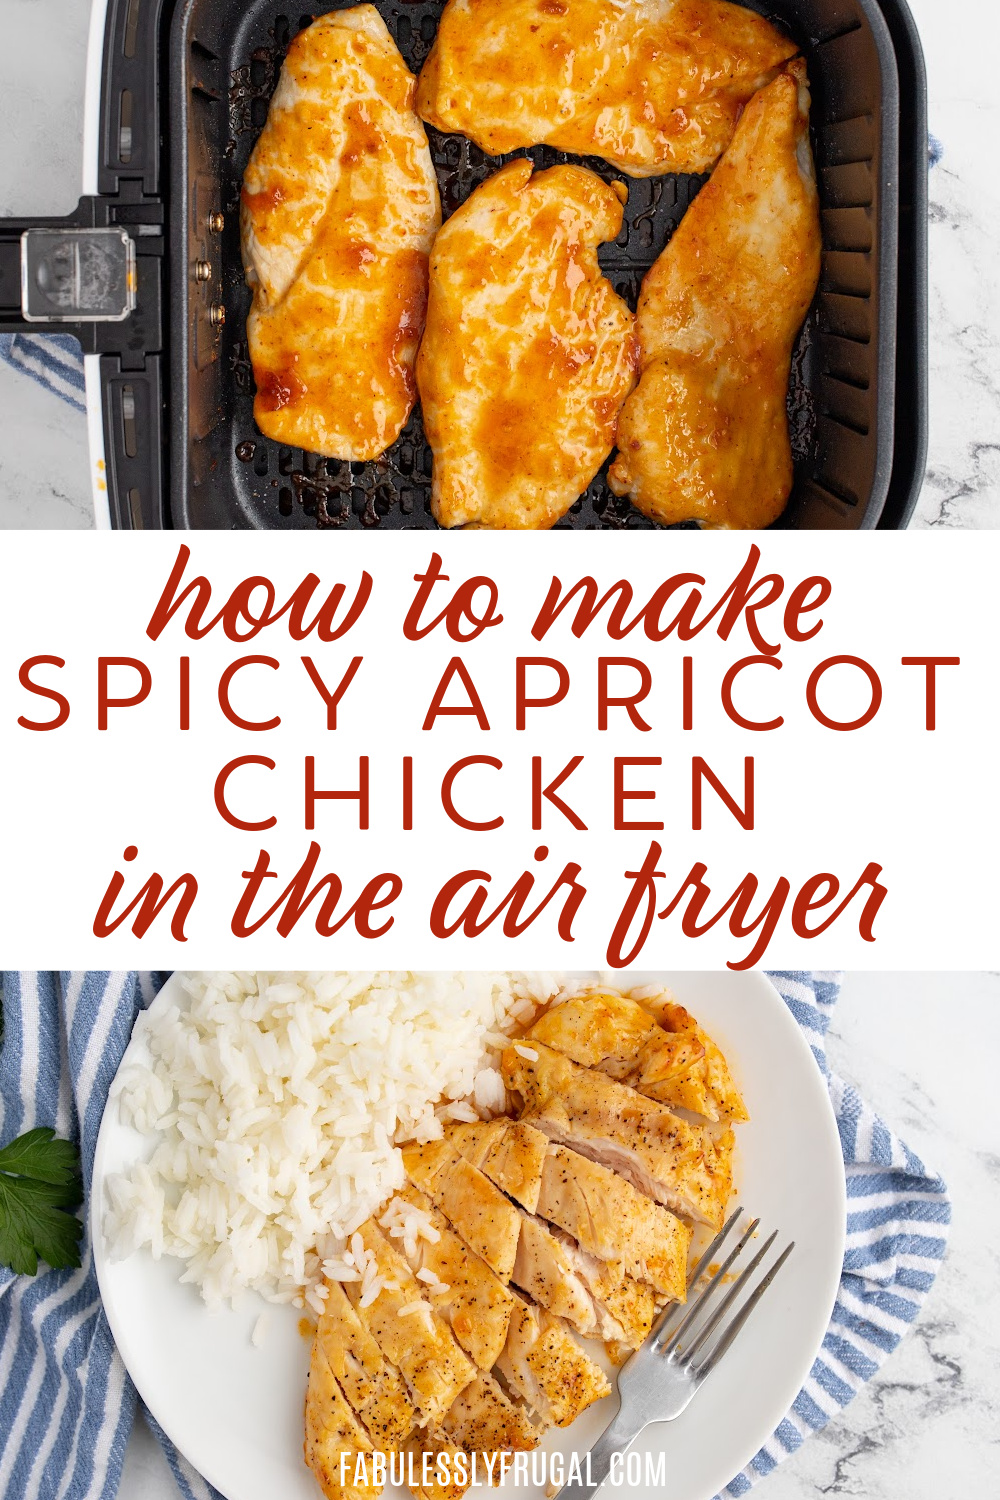 how to make spicy apricot chicken in the air fryer